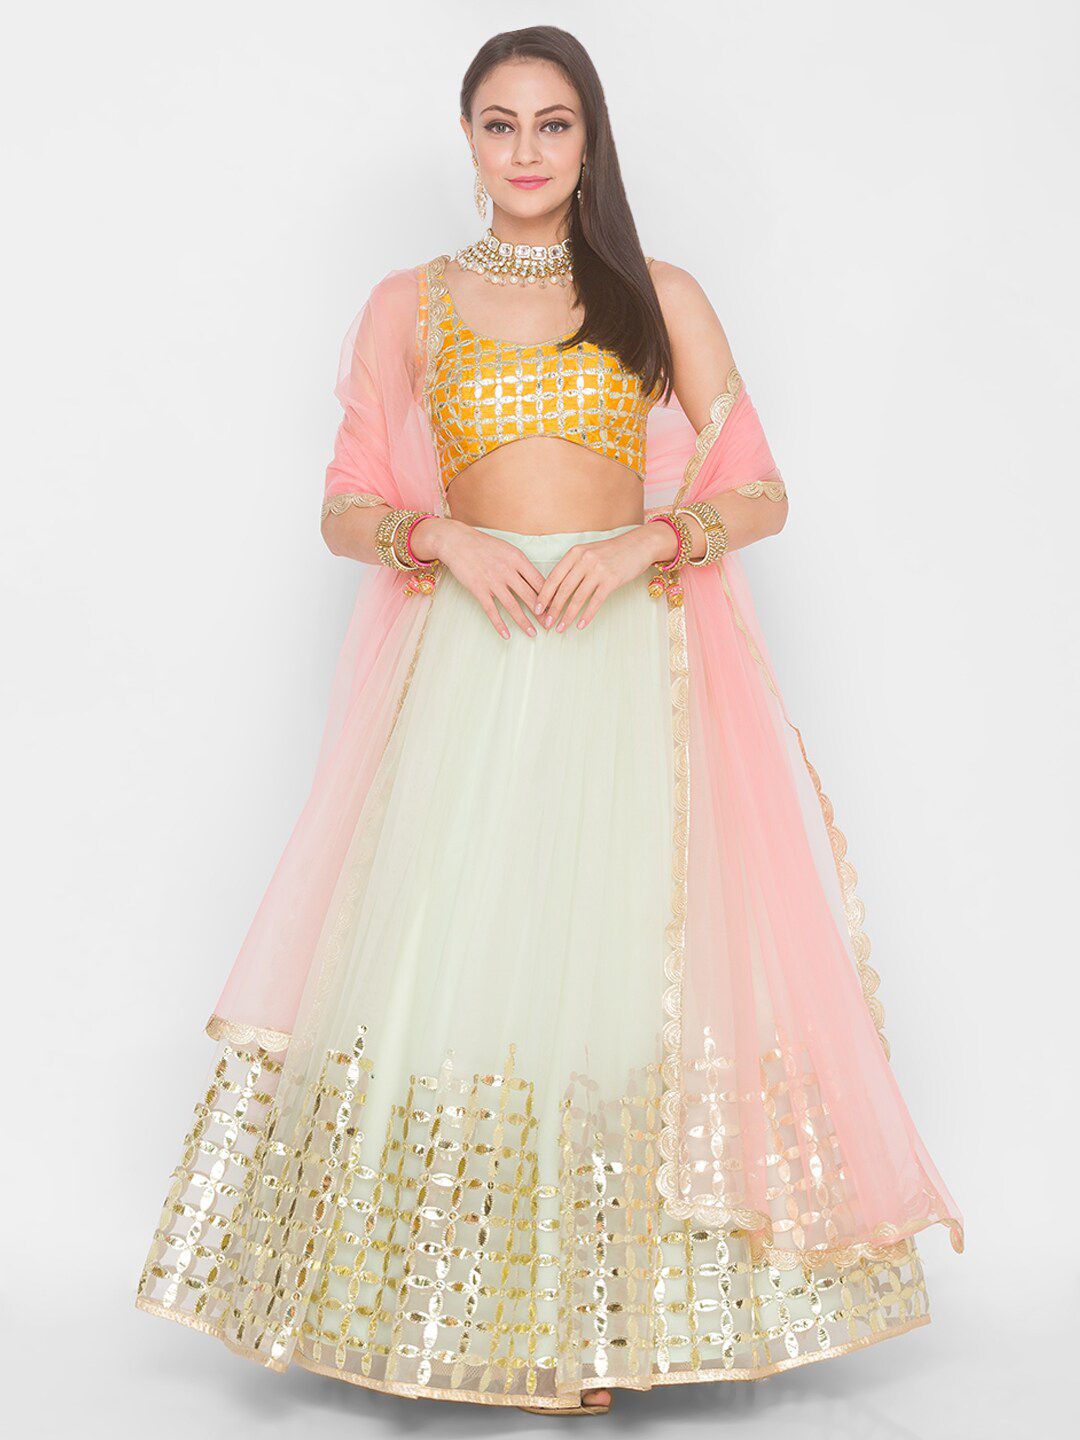 6Y COLLECTIVE Cream-Coloured & Mustard Embroidered Sequinned Semi-Stitched Lehenga Choli Price in India